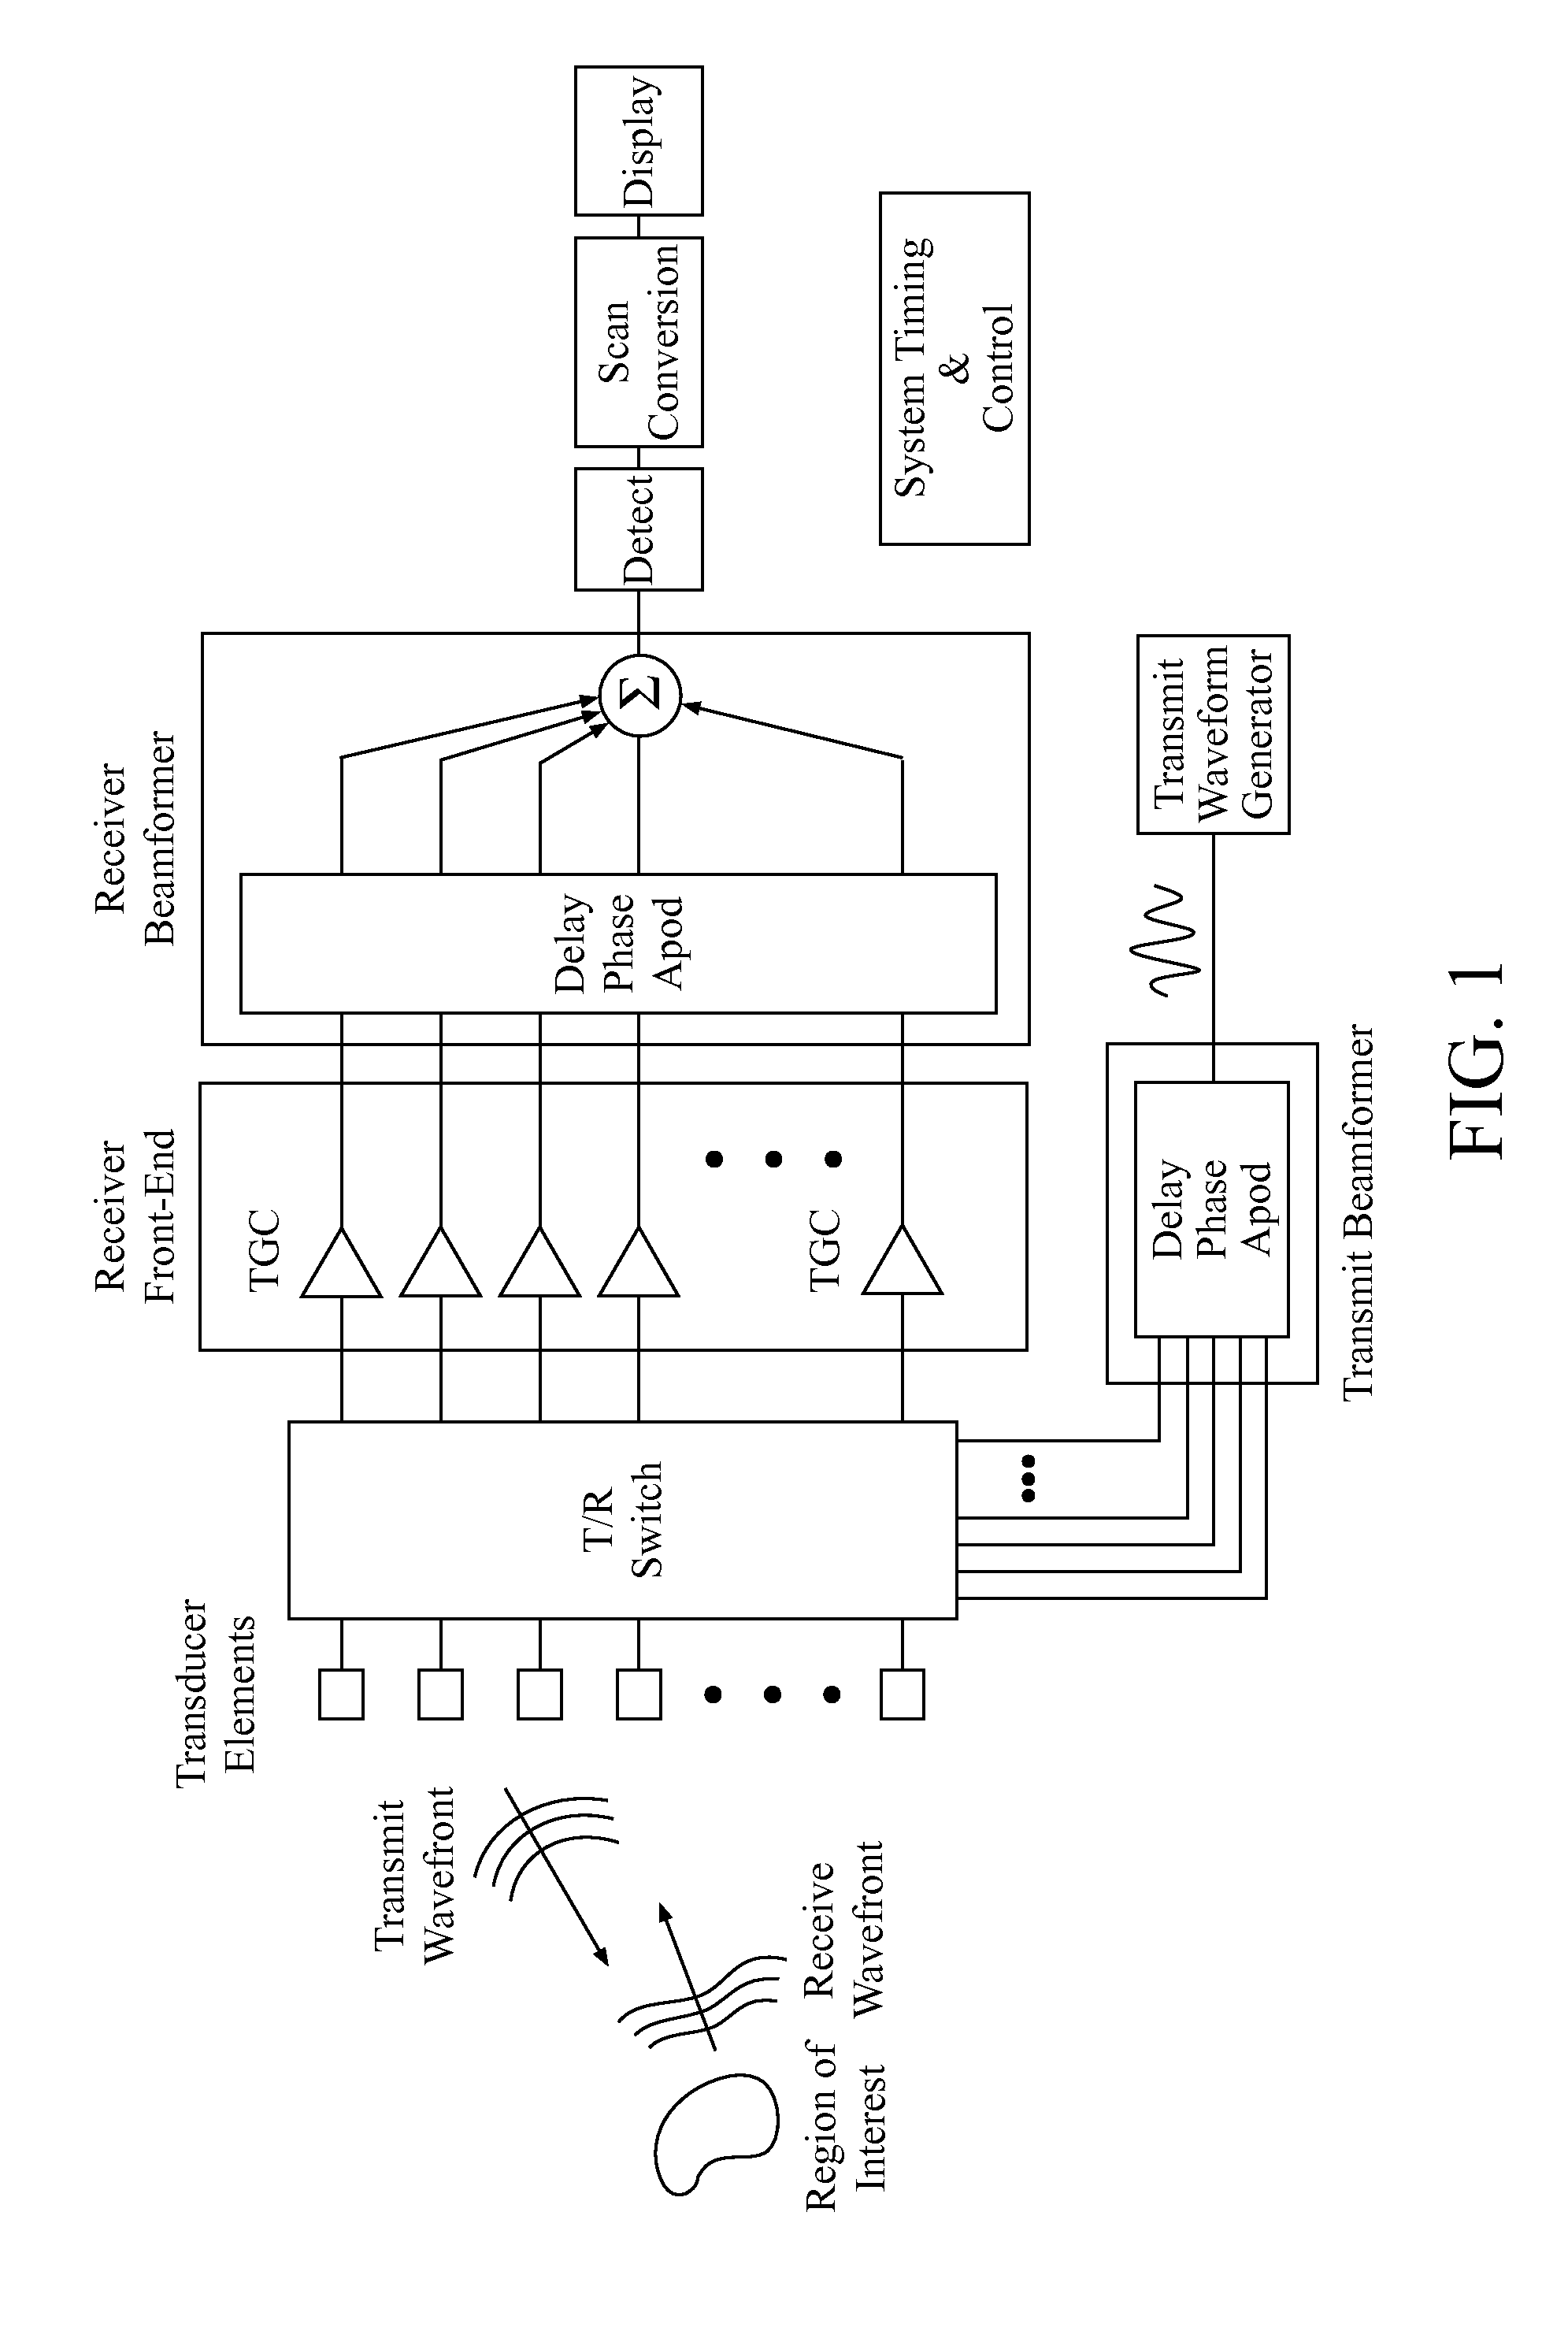 Continuous transmit focusing method and apparatus for ultrasound imaging system